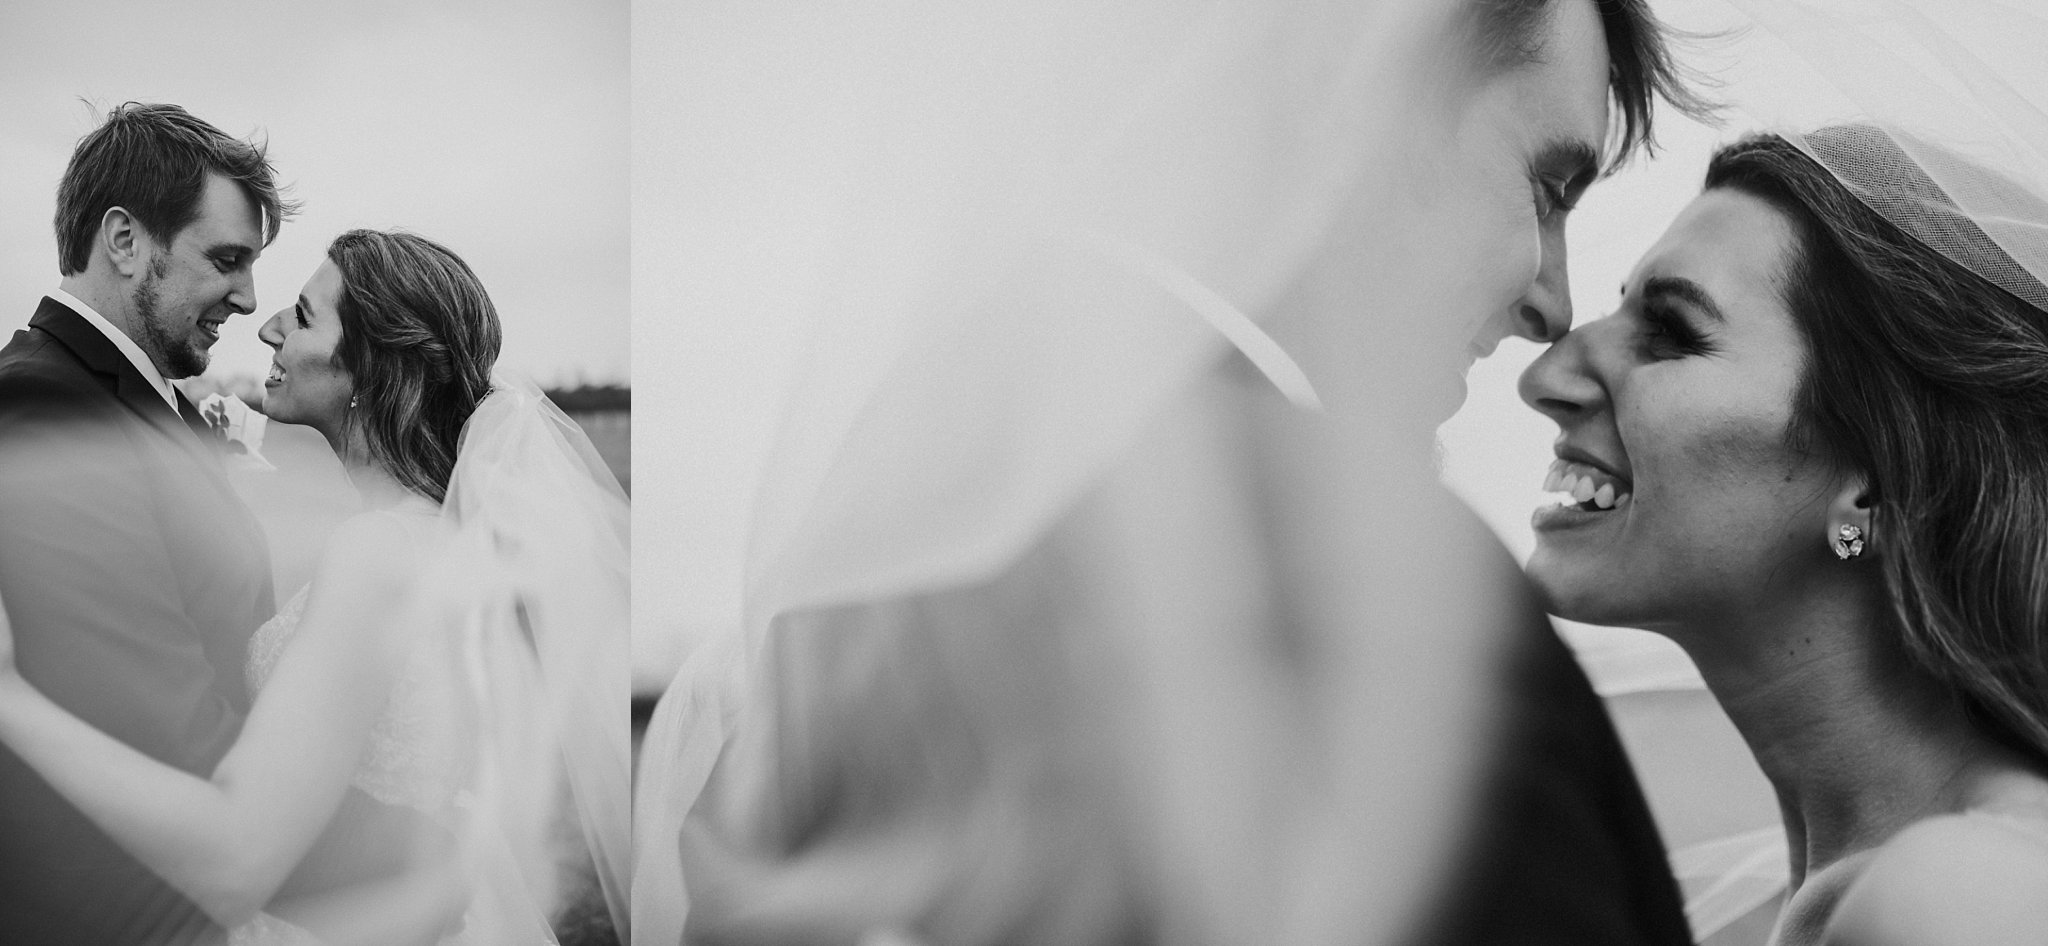 black and white photos of the bride and groom with the veil swirling around them